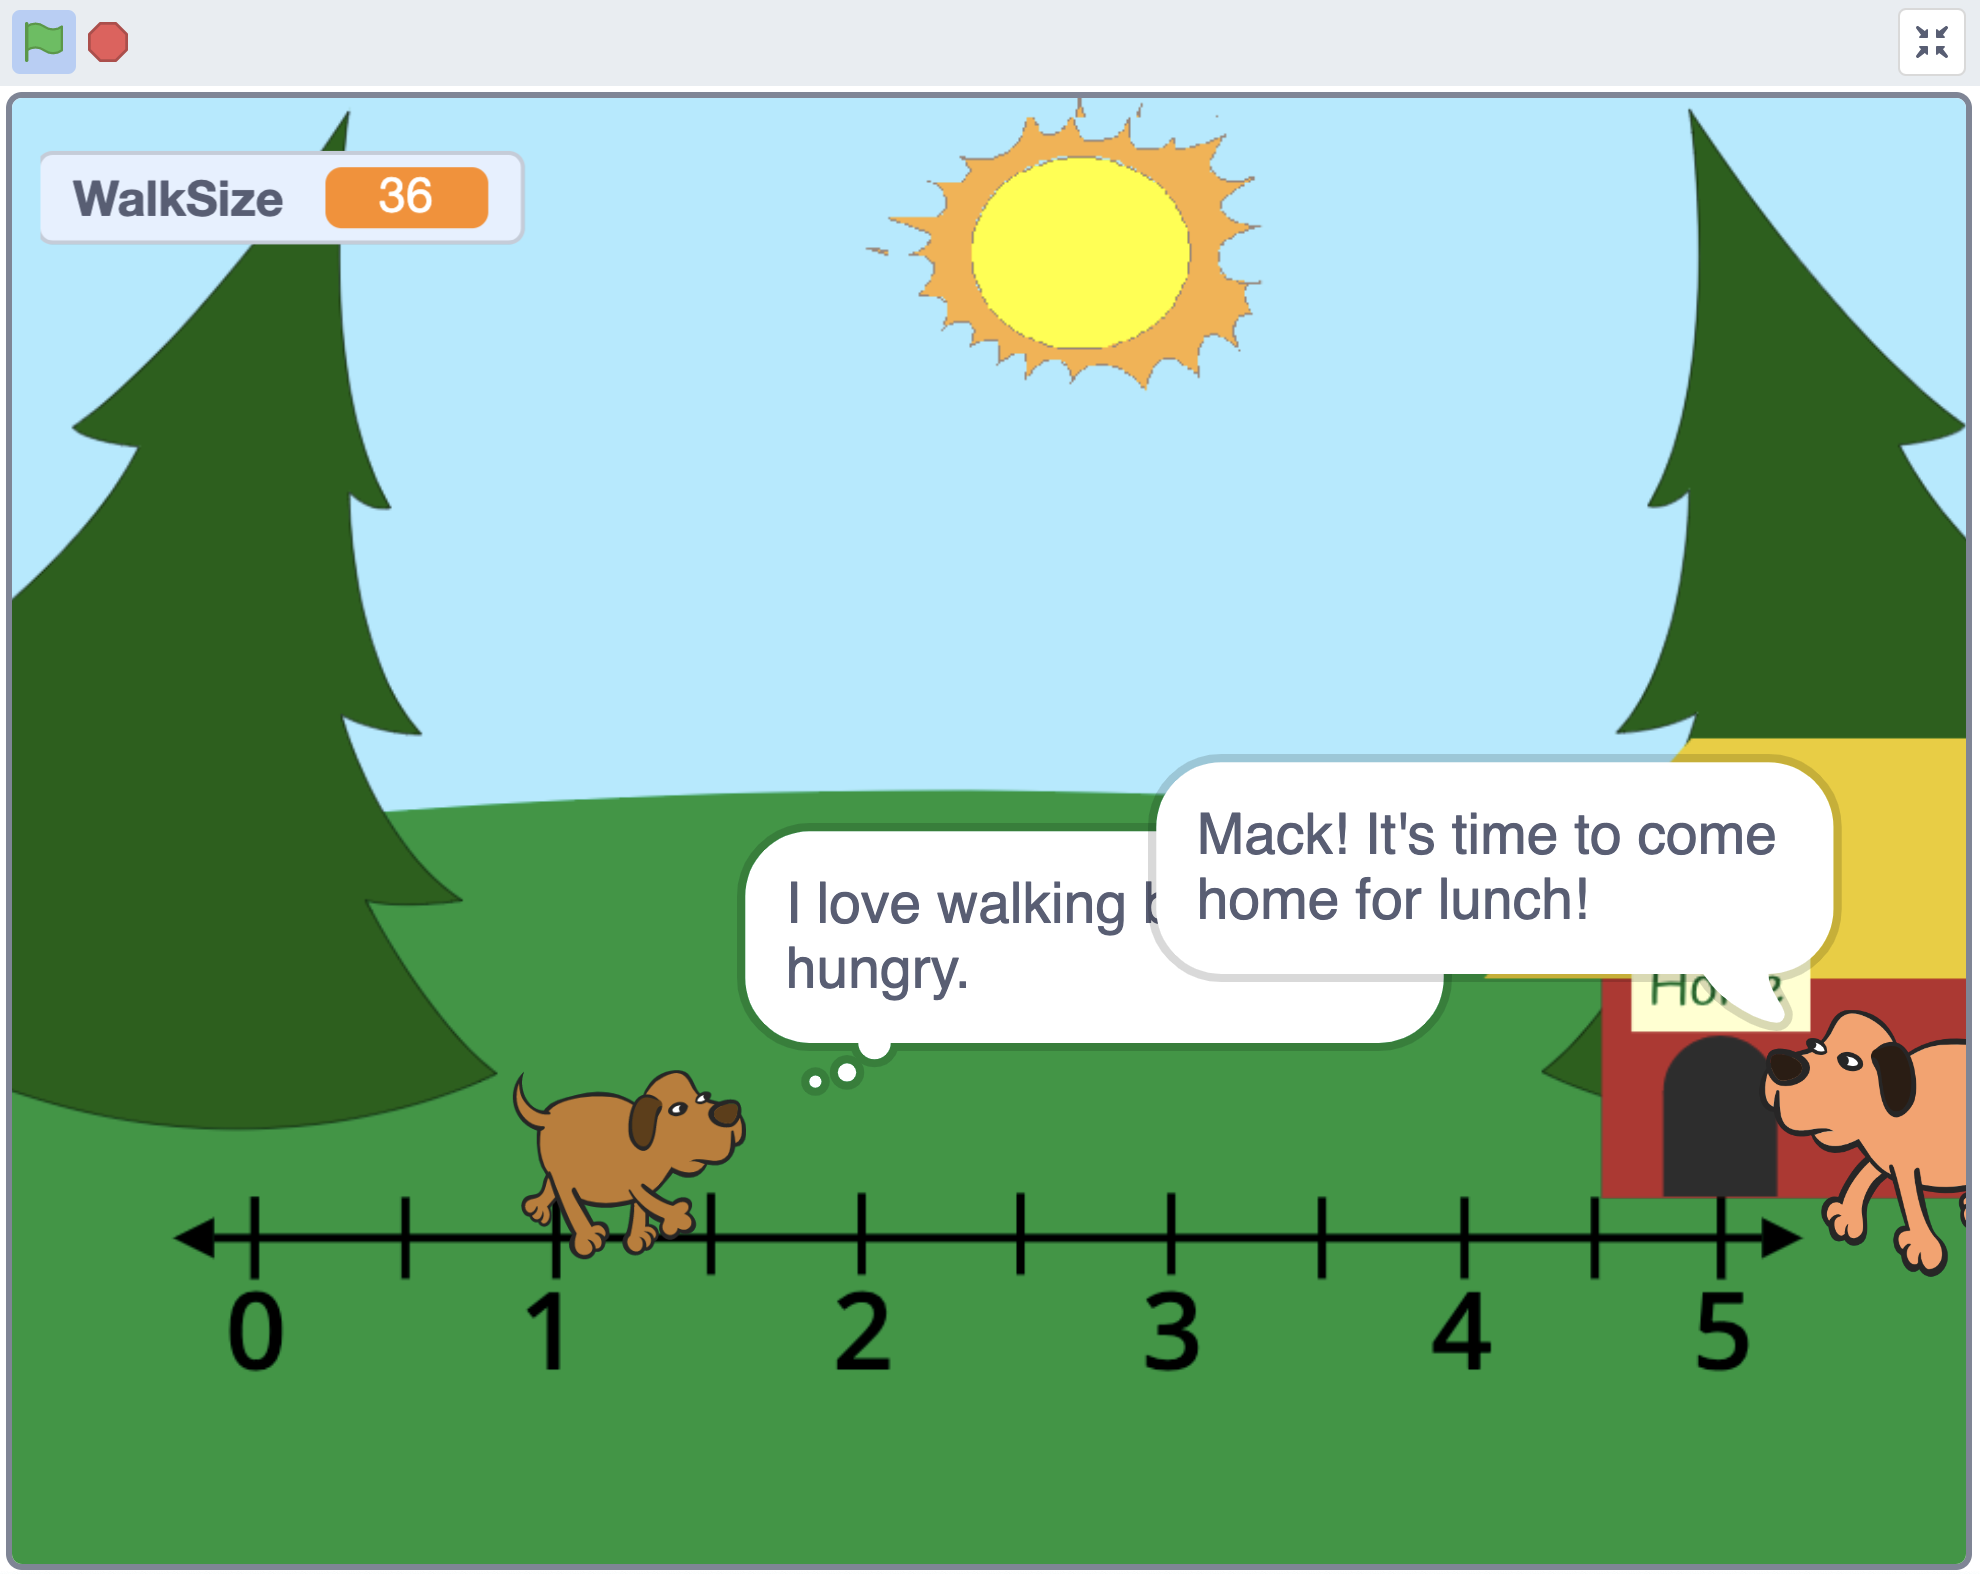 Scratch project stage depicting an outdoor setting with a house at the end of a number line. One dog walks over the number line with a speech bubble saying: "I love walking but I'm so hungry." Another dog at the end near the house has a speech bubble saying "Mack! it's time to come home for lunch."